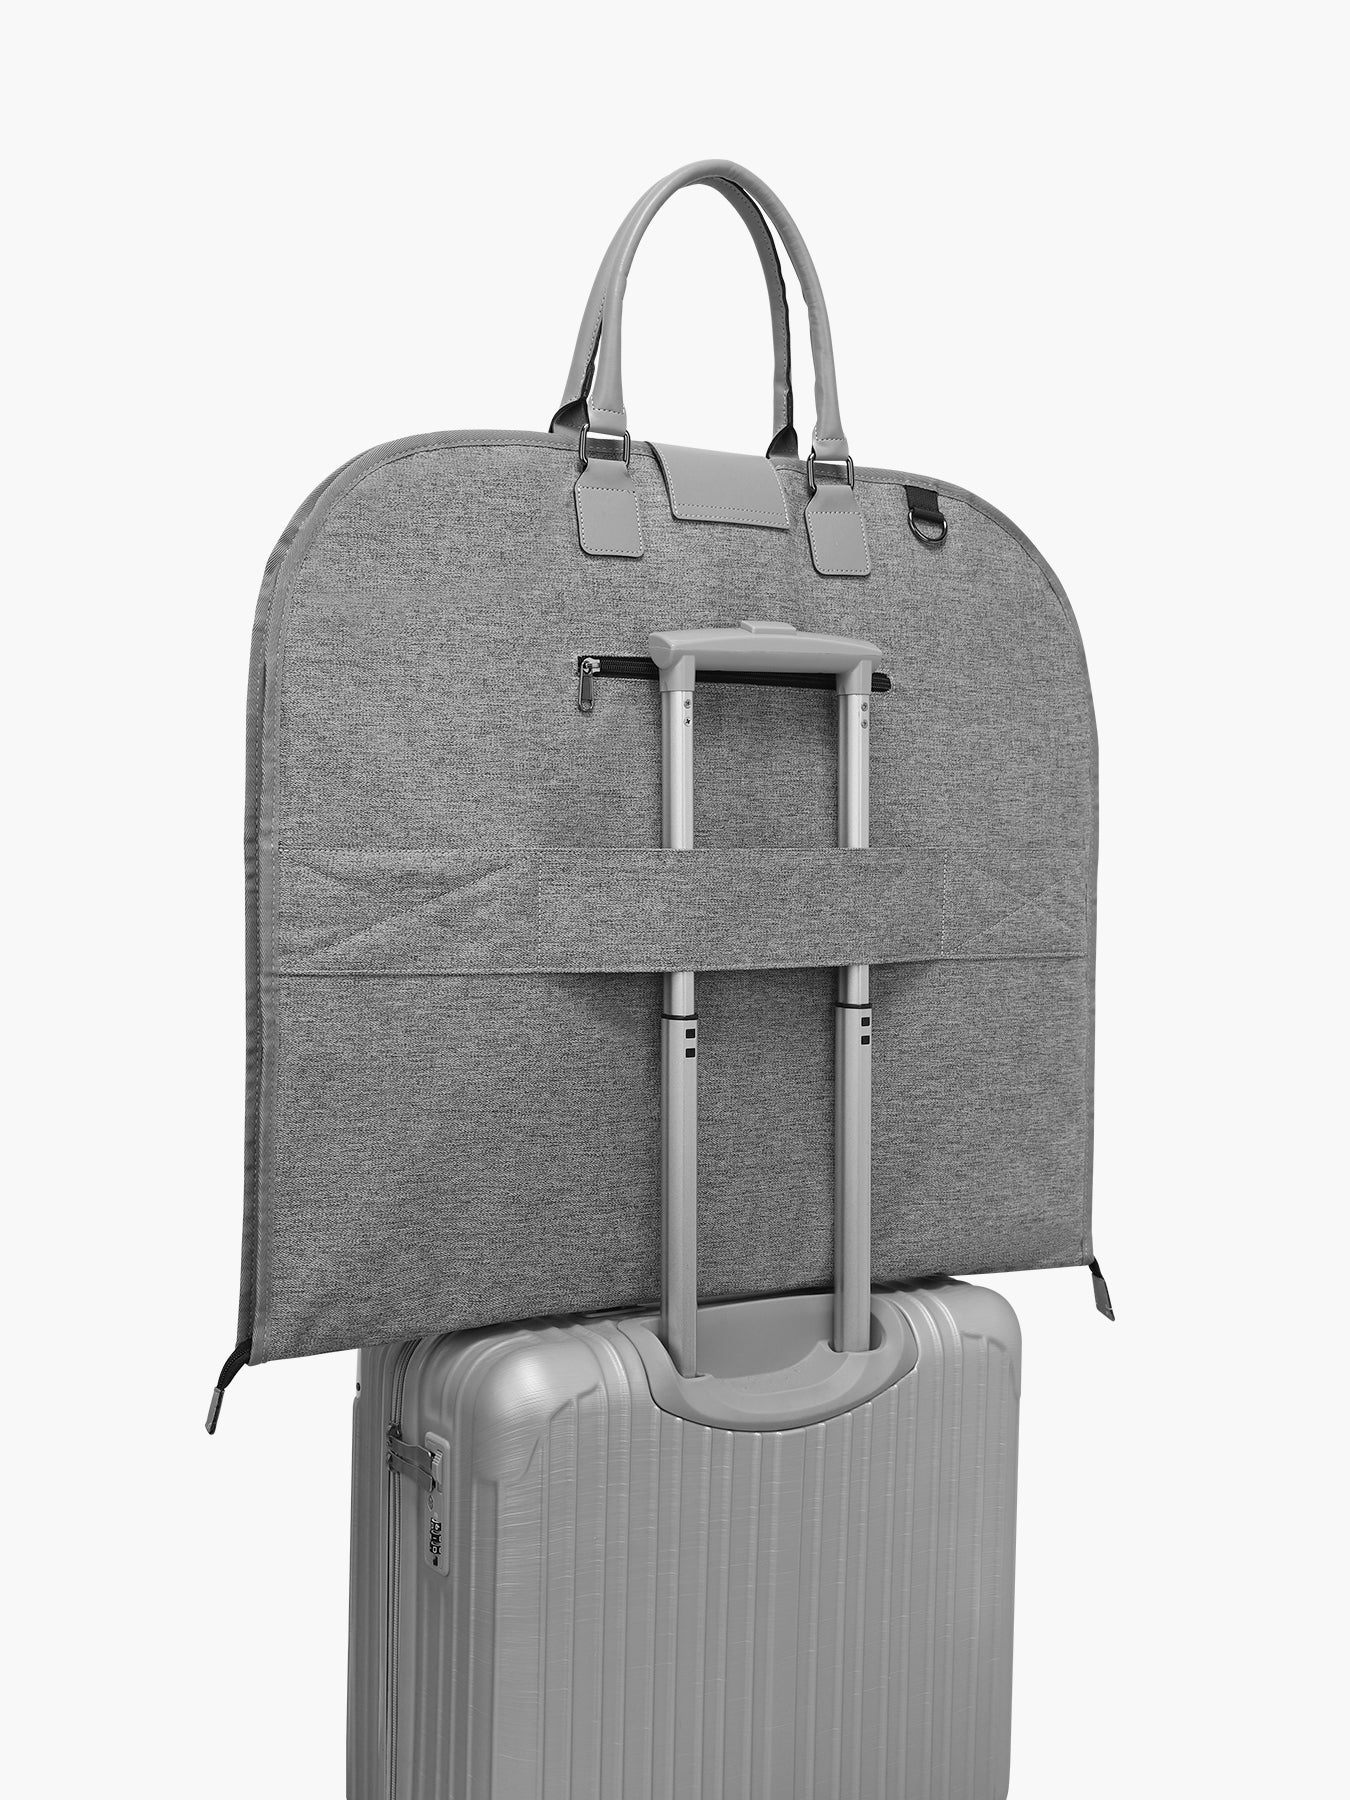 Keep Your Clothes Safe and Tidy with Modoker Garment Bags